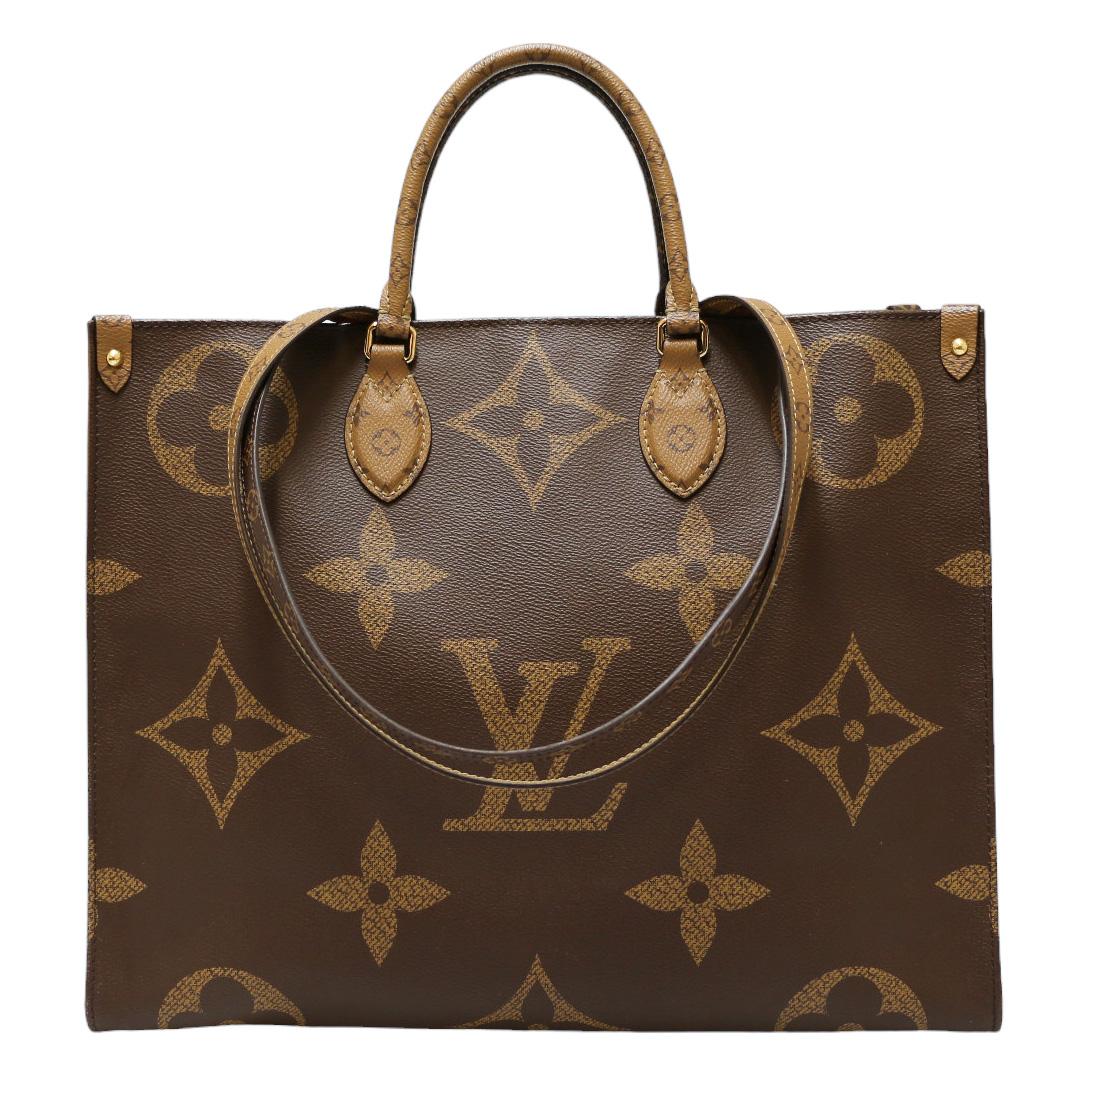 Amazing On The Go Louis Vuitton monogram tote bag

Condition: excellent
Made in Italy
Collection: On The Go large
Genre: women
Material: toile
Interior: red fabric
Color: brown monogram
Dimensions: 41 x 34 x 19 cm
Serial number: FN02...
Year: